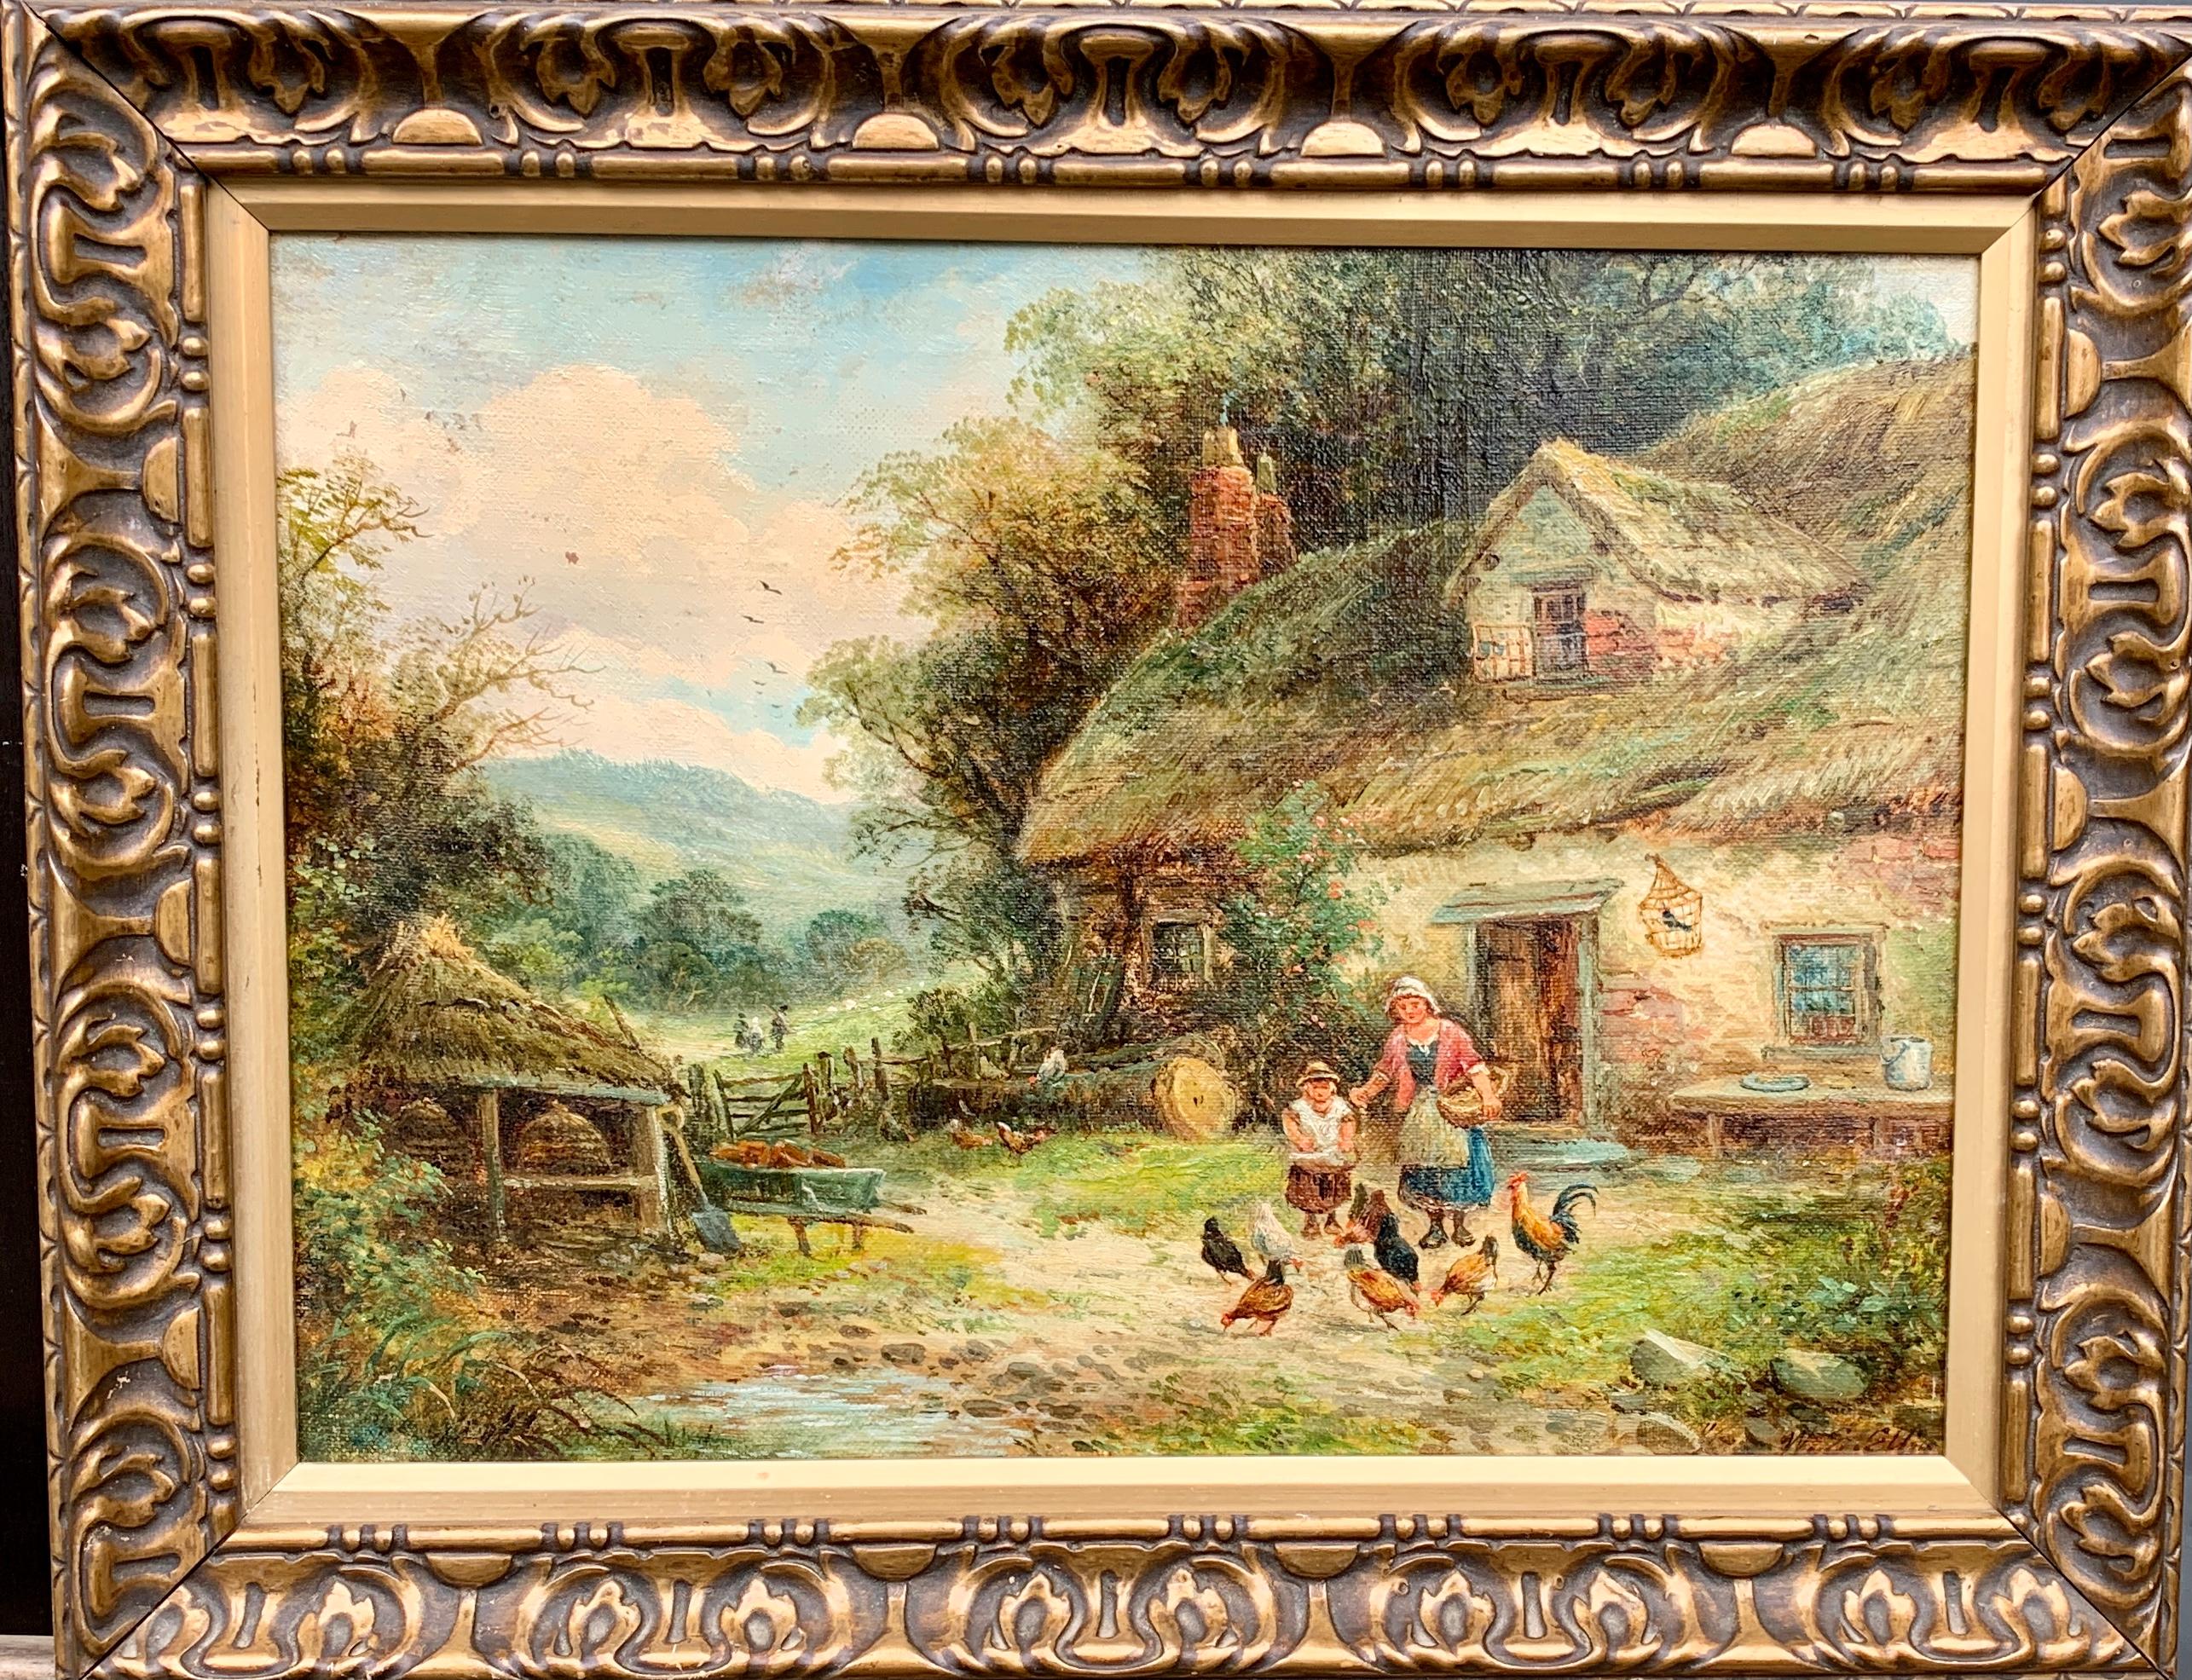 19th century English cottage landscape with mother and child feeding chickens - Painting by Walter Ellis